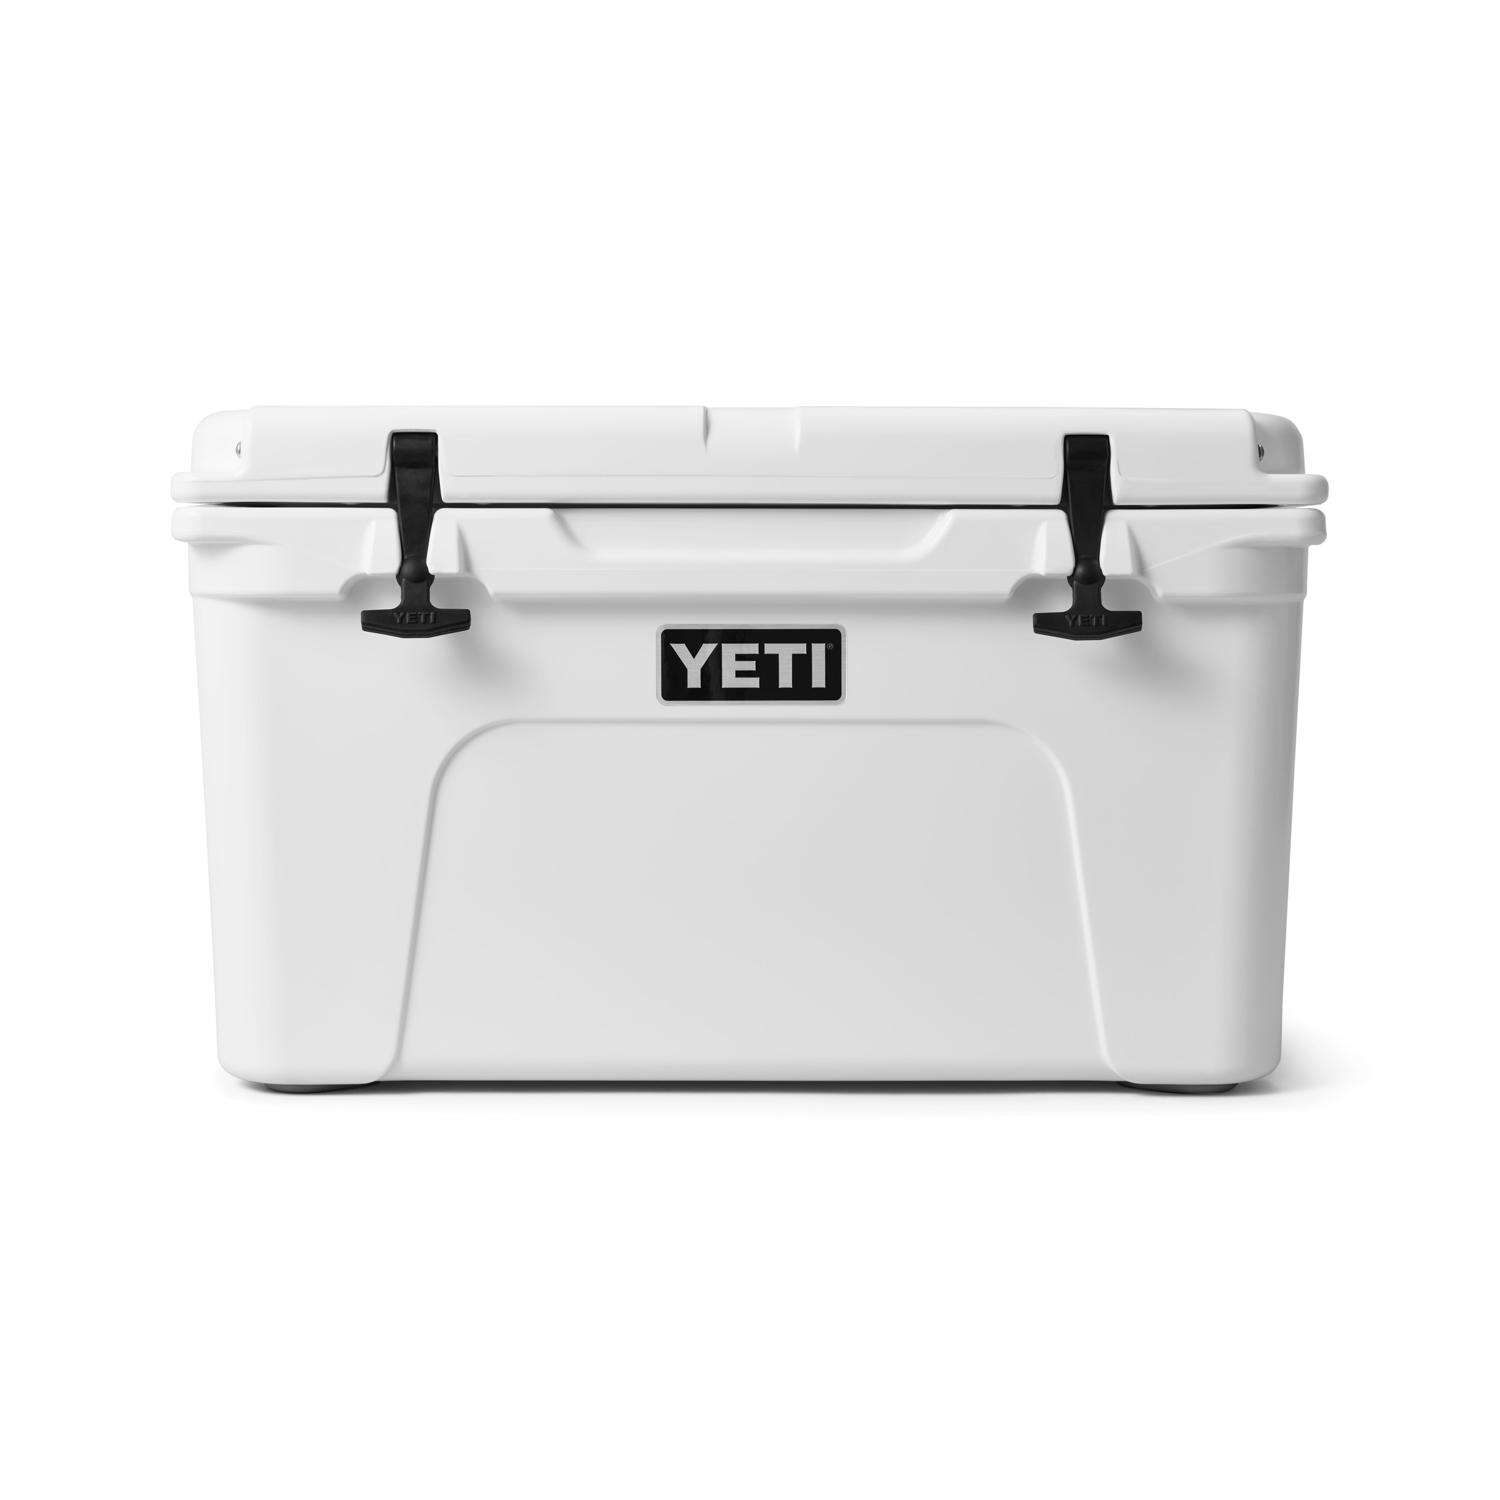 Yeti cooler sale: Save 20% on the Tundra 45